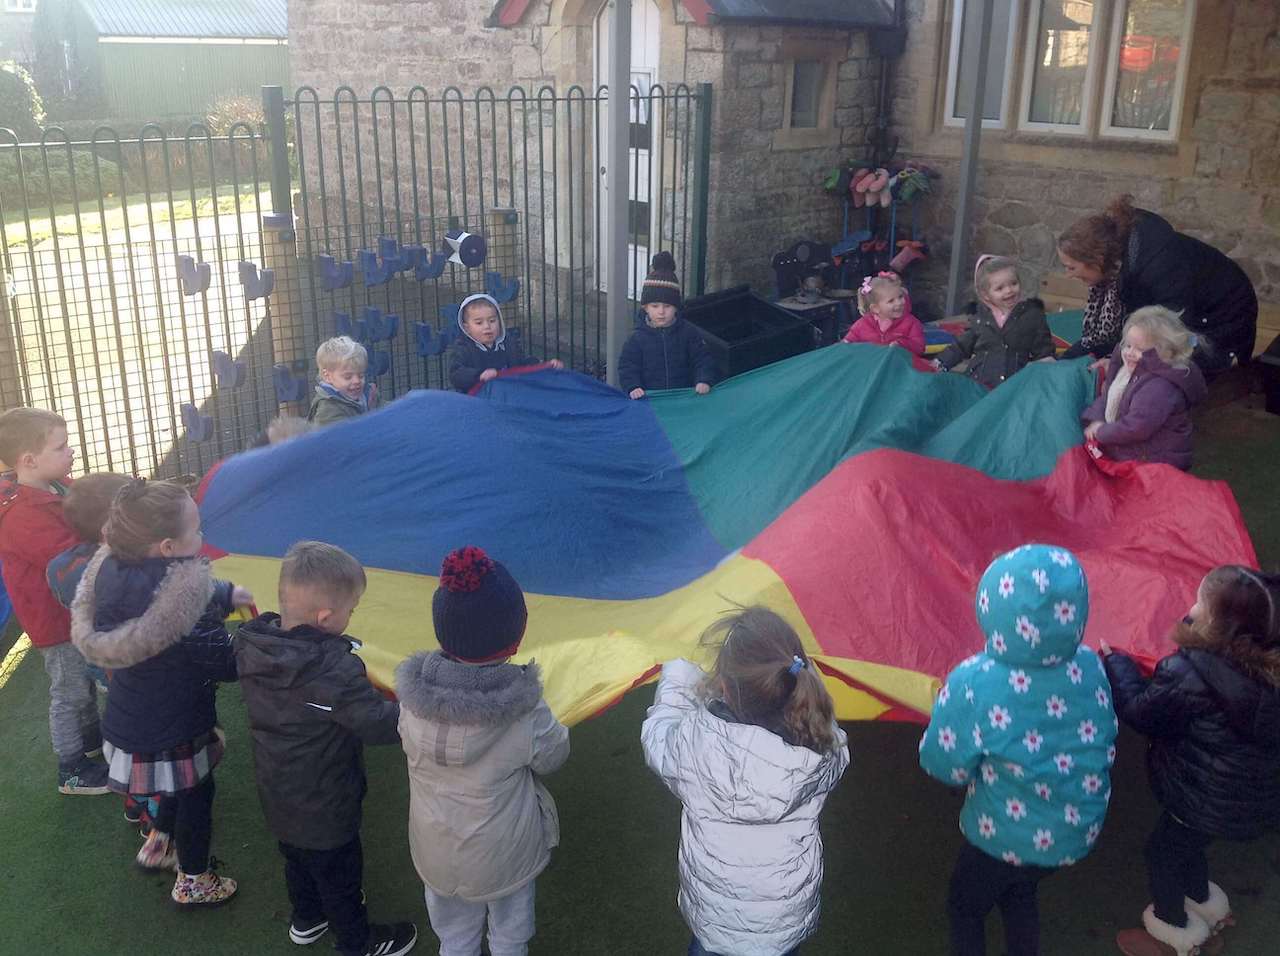 A group of children playing outside, with a colourful parachute